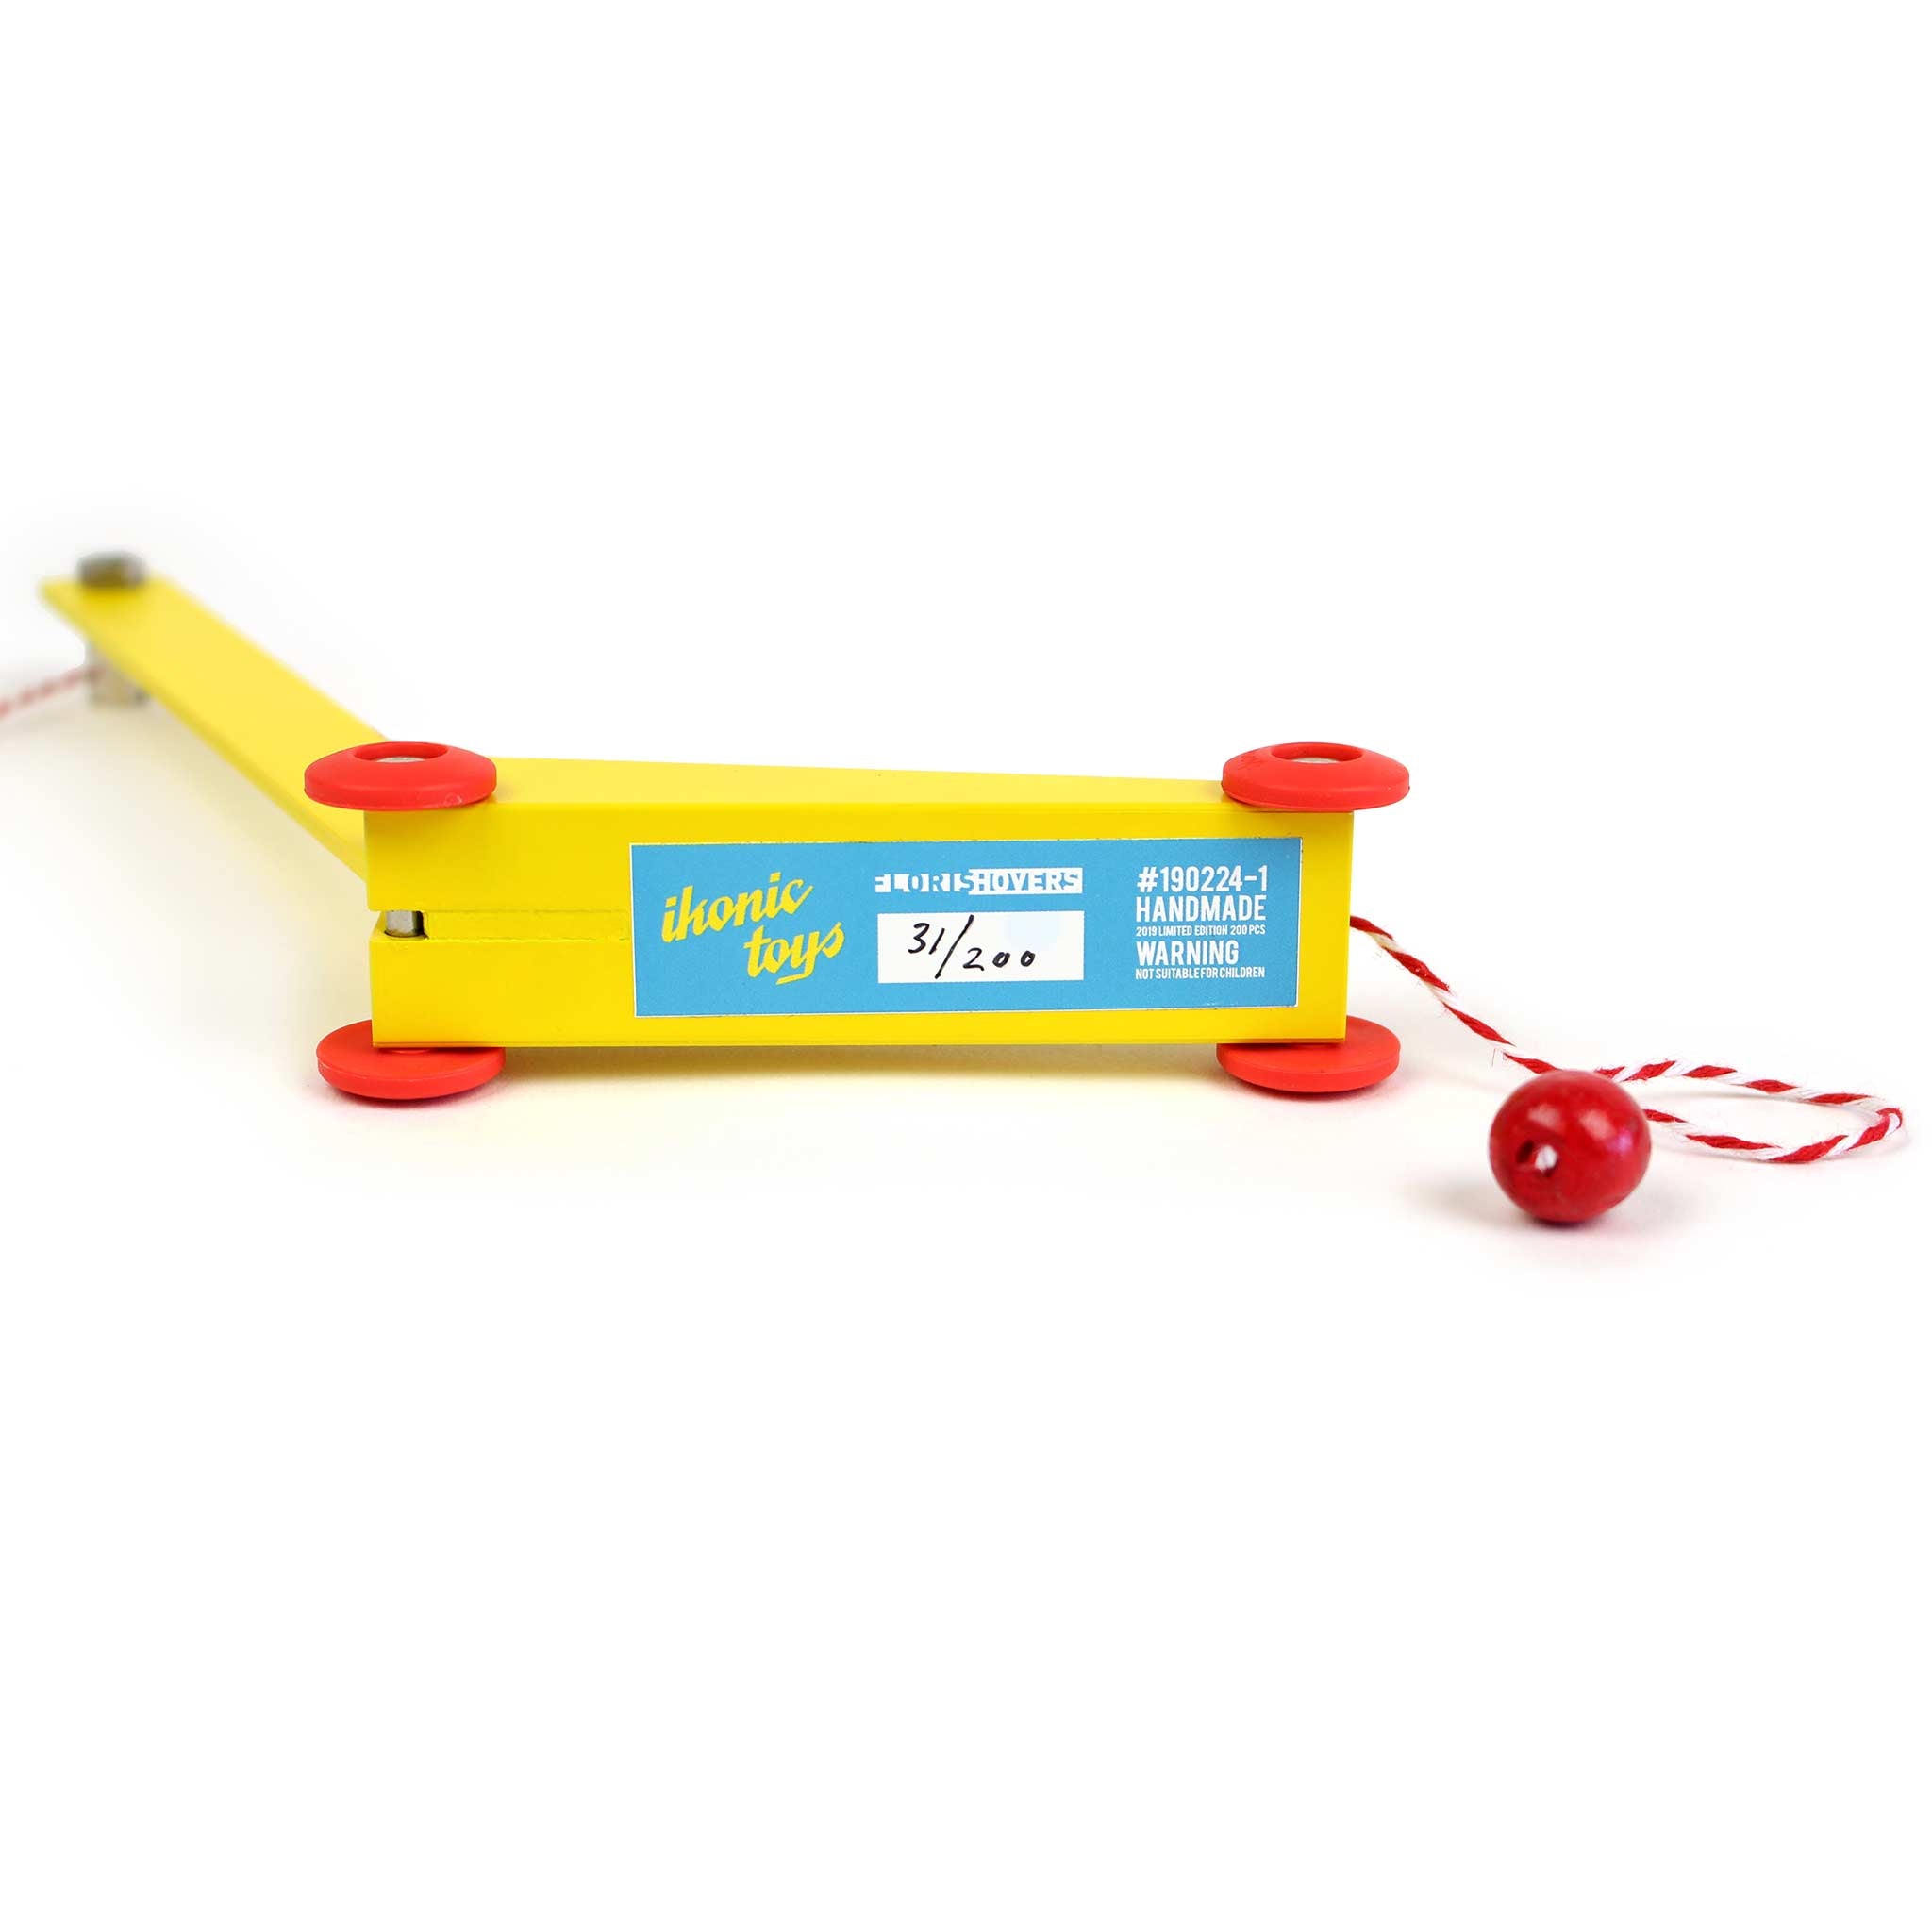 DUOTONE CAR YELLOW CRANE | Gelber SPIELZEUG-KRAN aus Holz | 200 Stck. Limited Edition | Floris Hovers | Ikonic